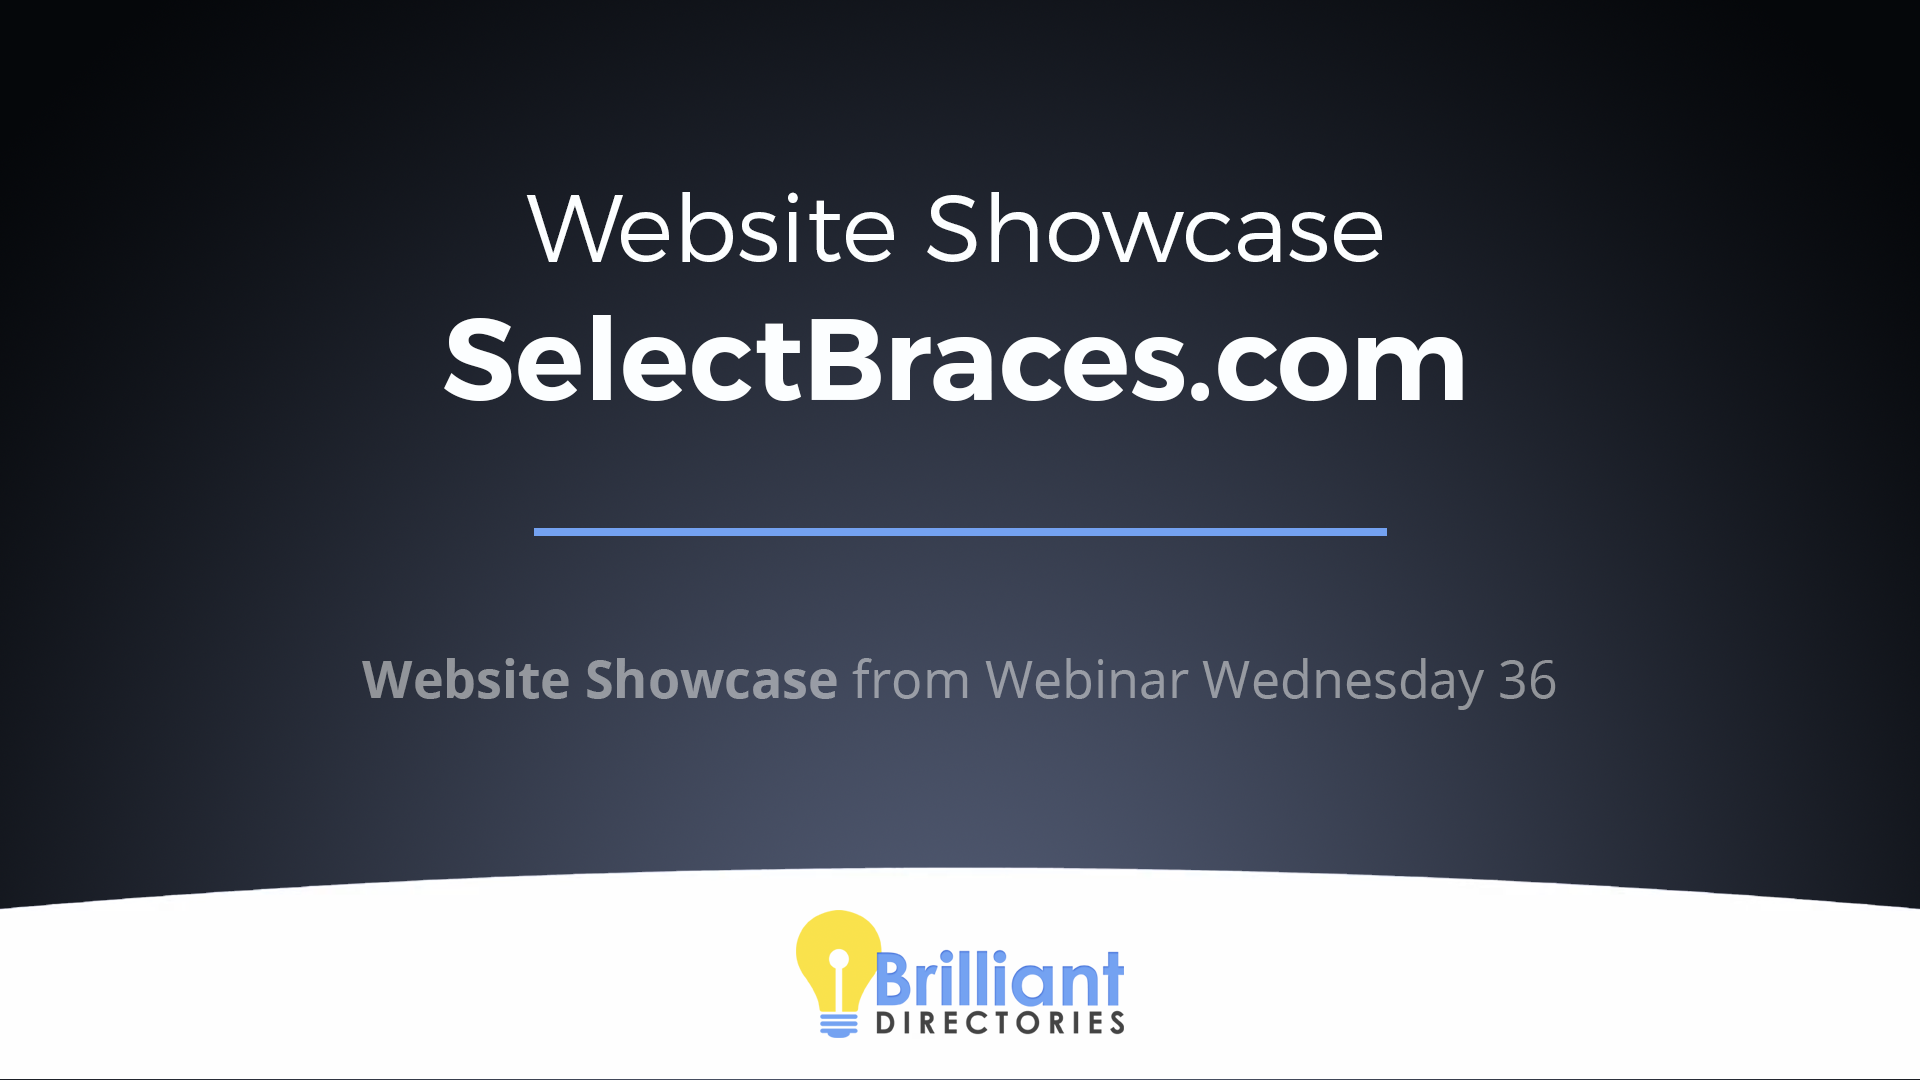 Case Study: Orthodontist Directory powered by Brilliant Directories